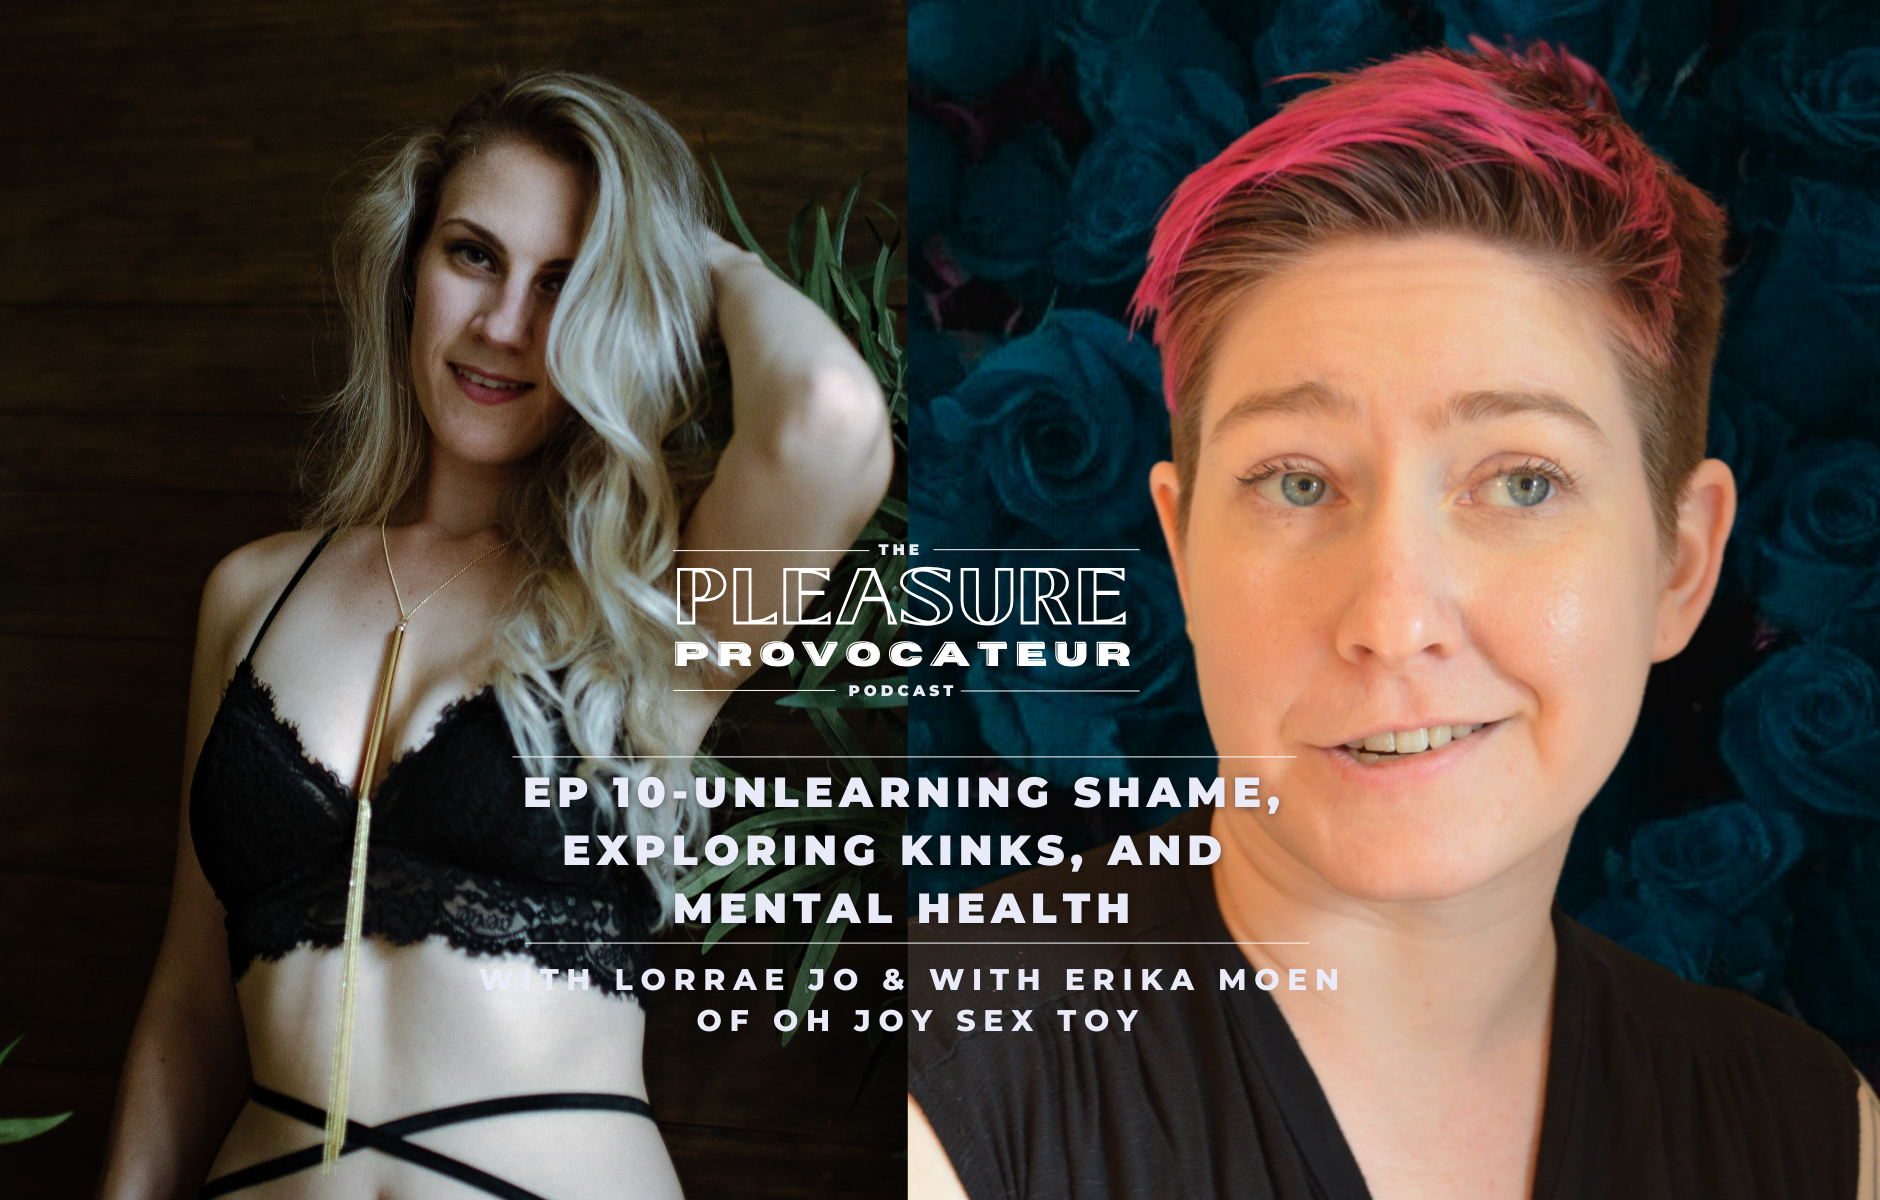 Cover image of Lorrae and Erika for The Pleasure Provocateur podcast.